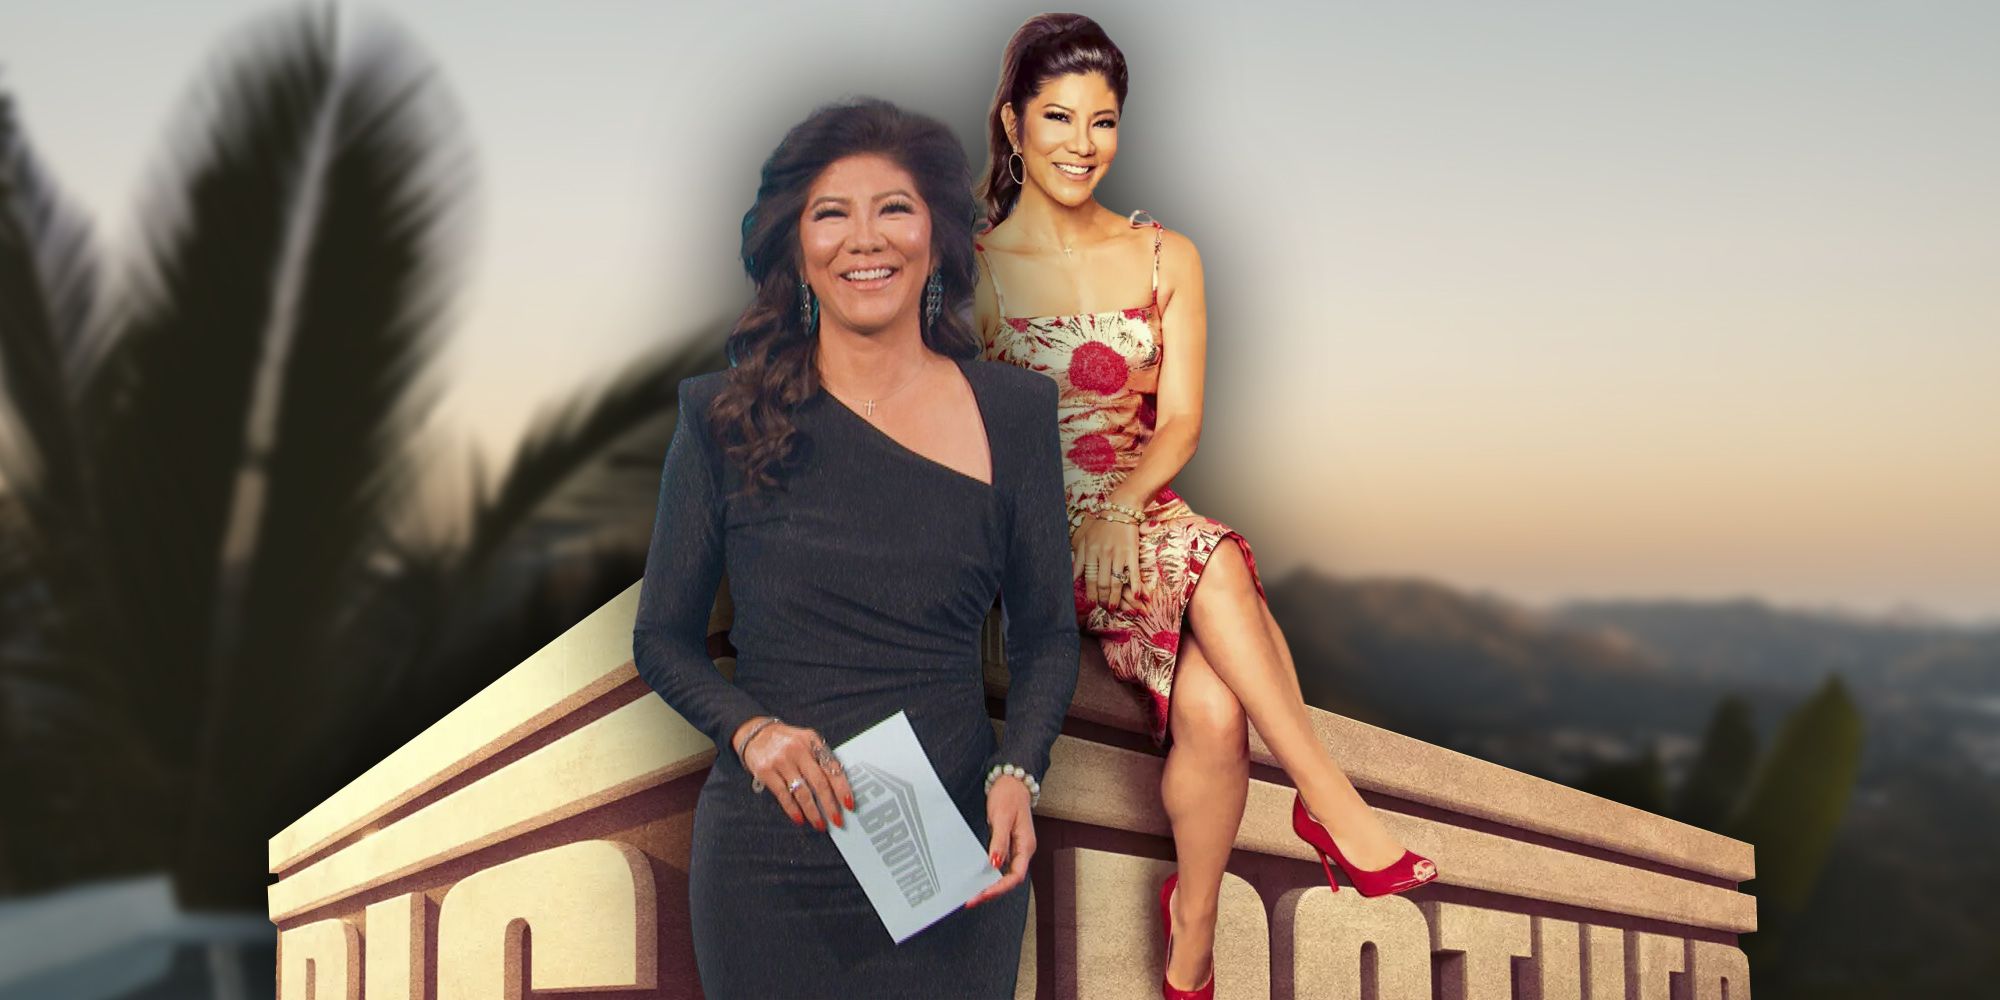 Julie Chen from Big Brother